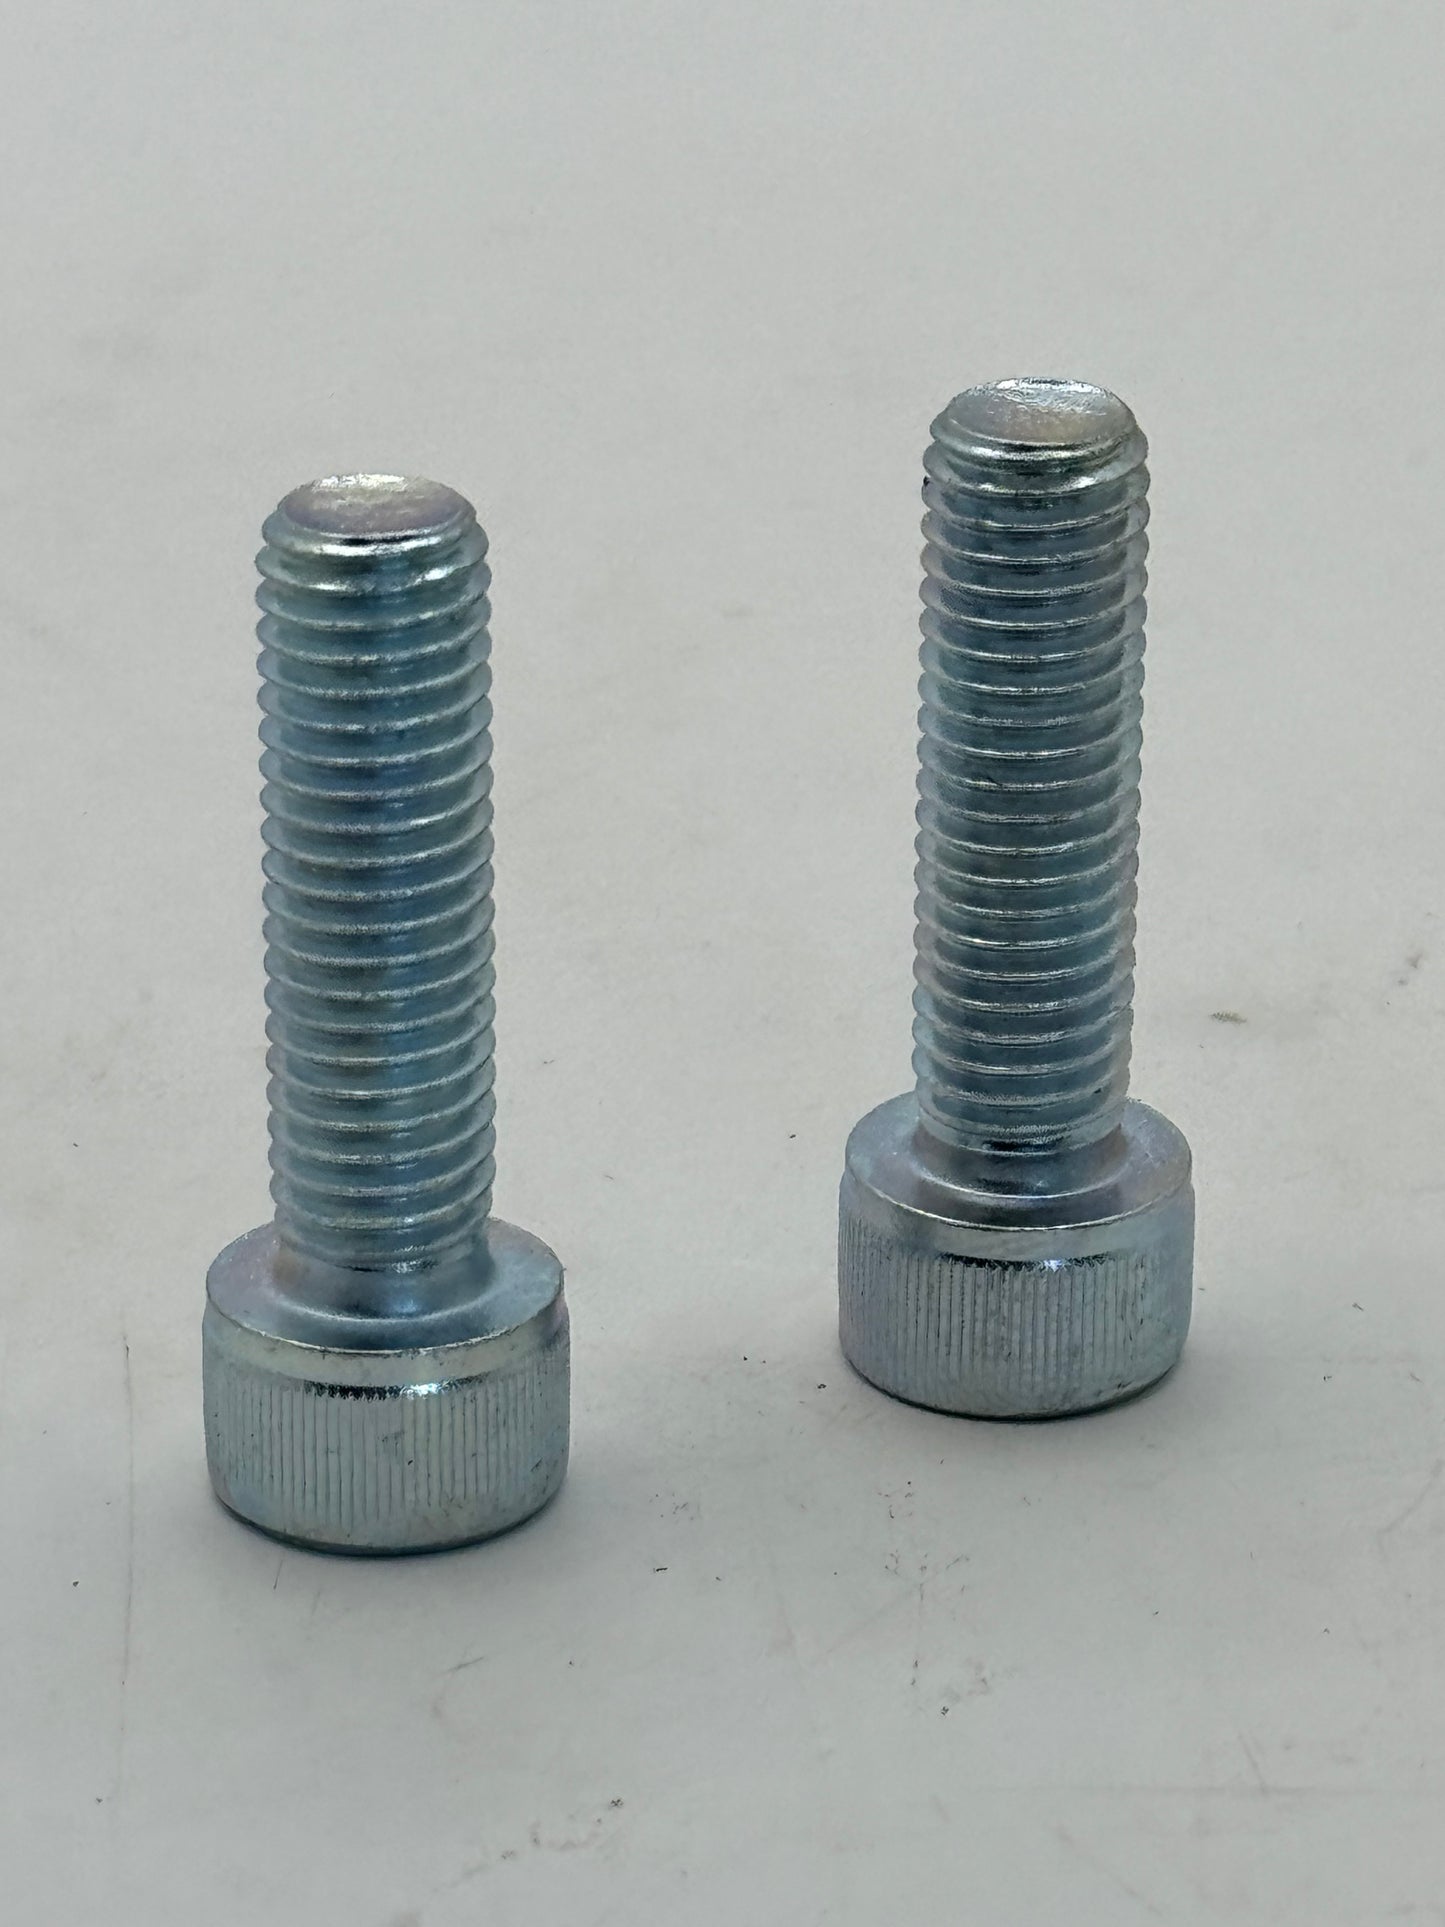 M8 ENGINE CLAMP BOLTS